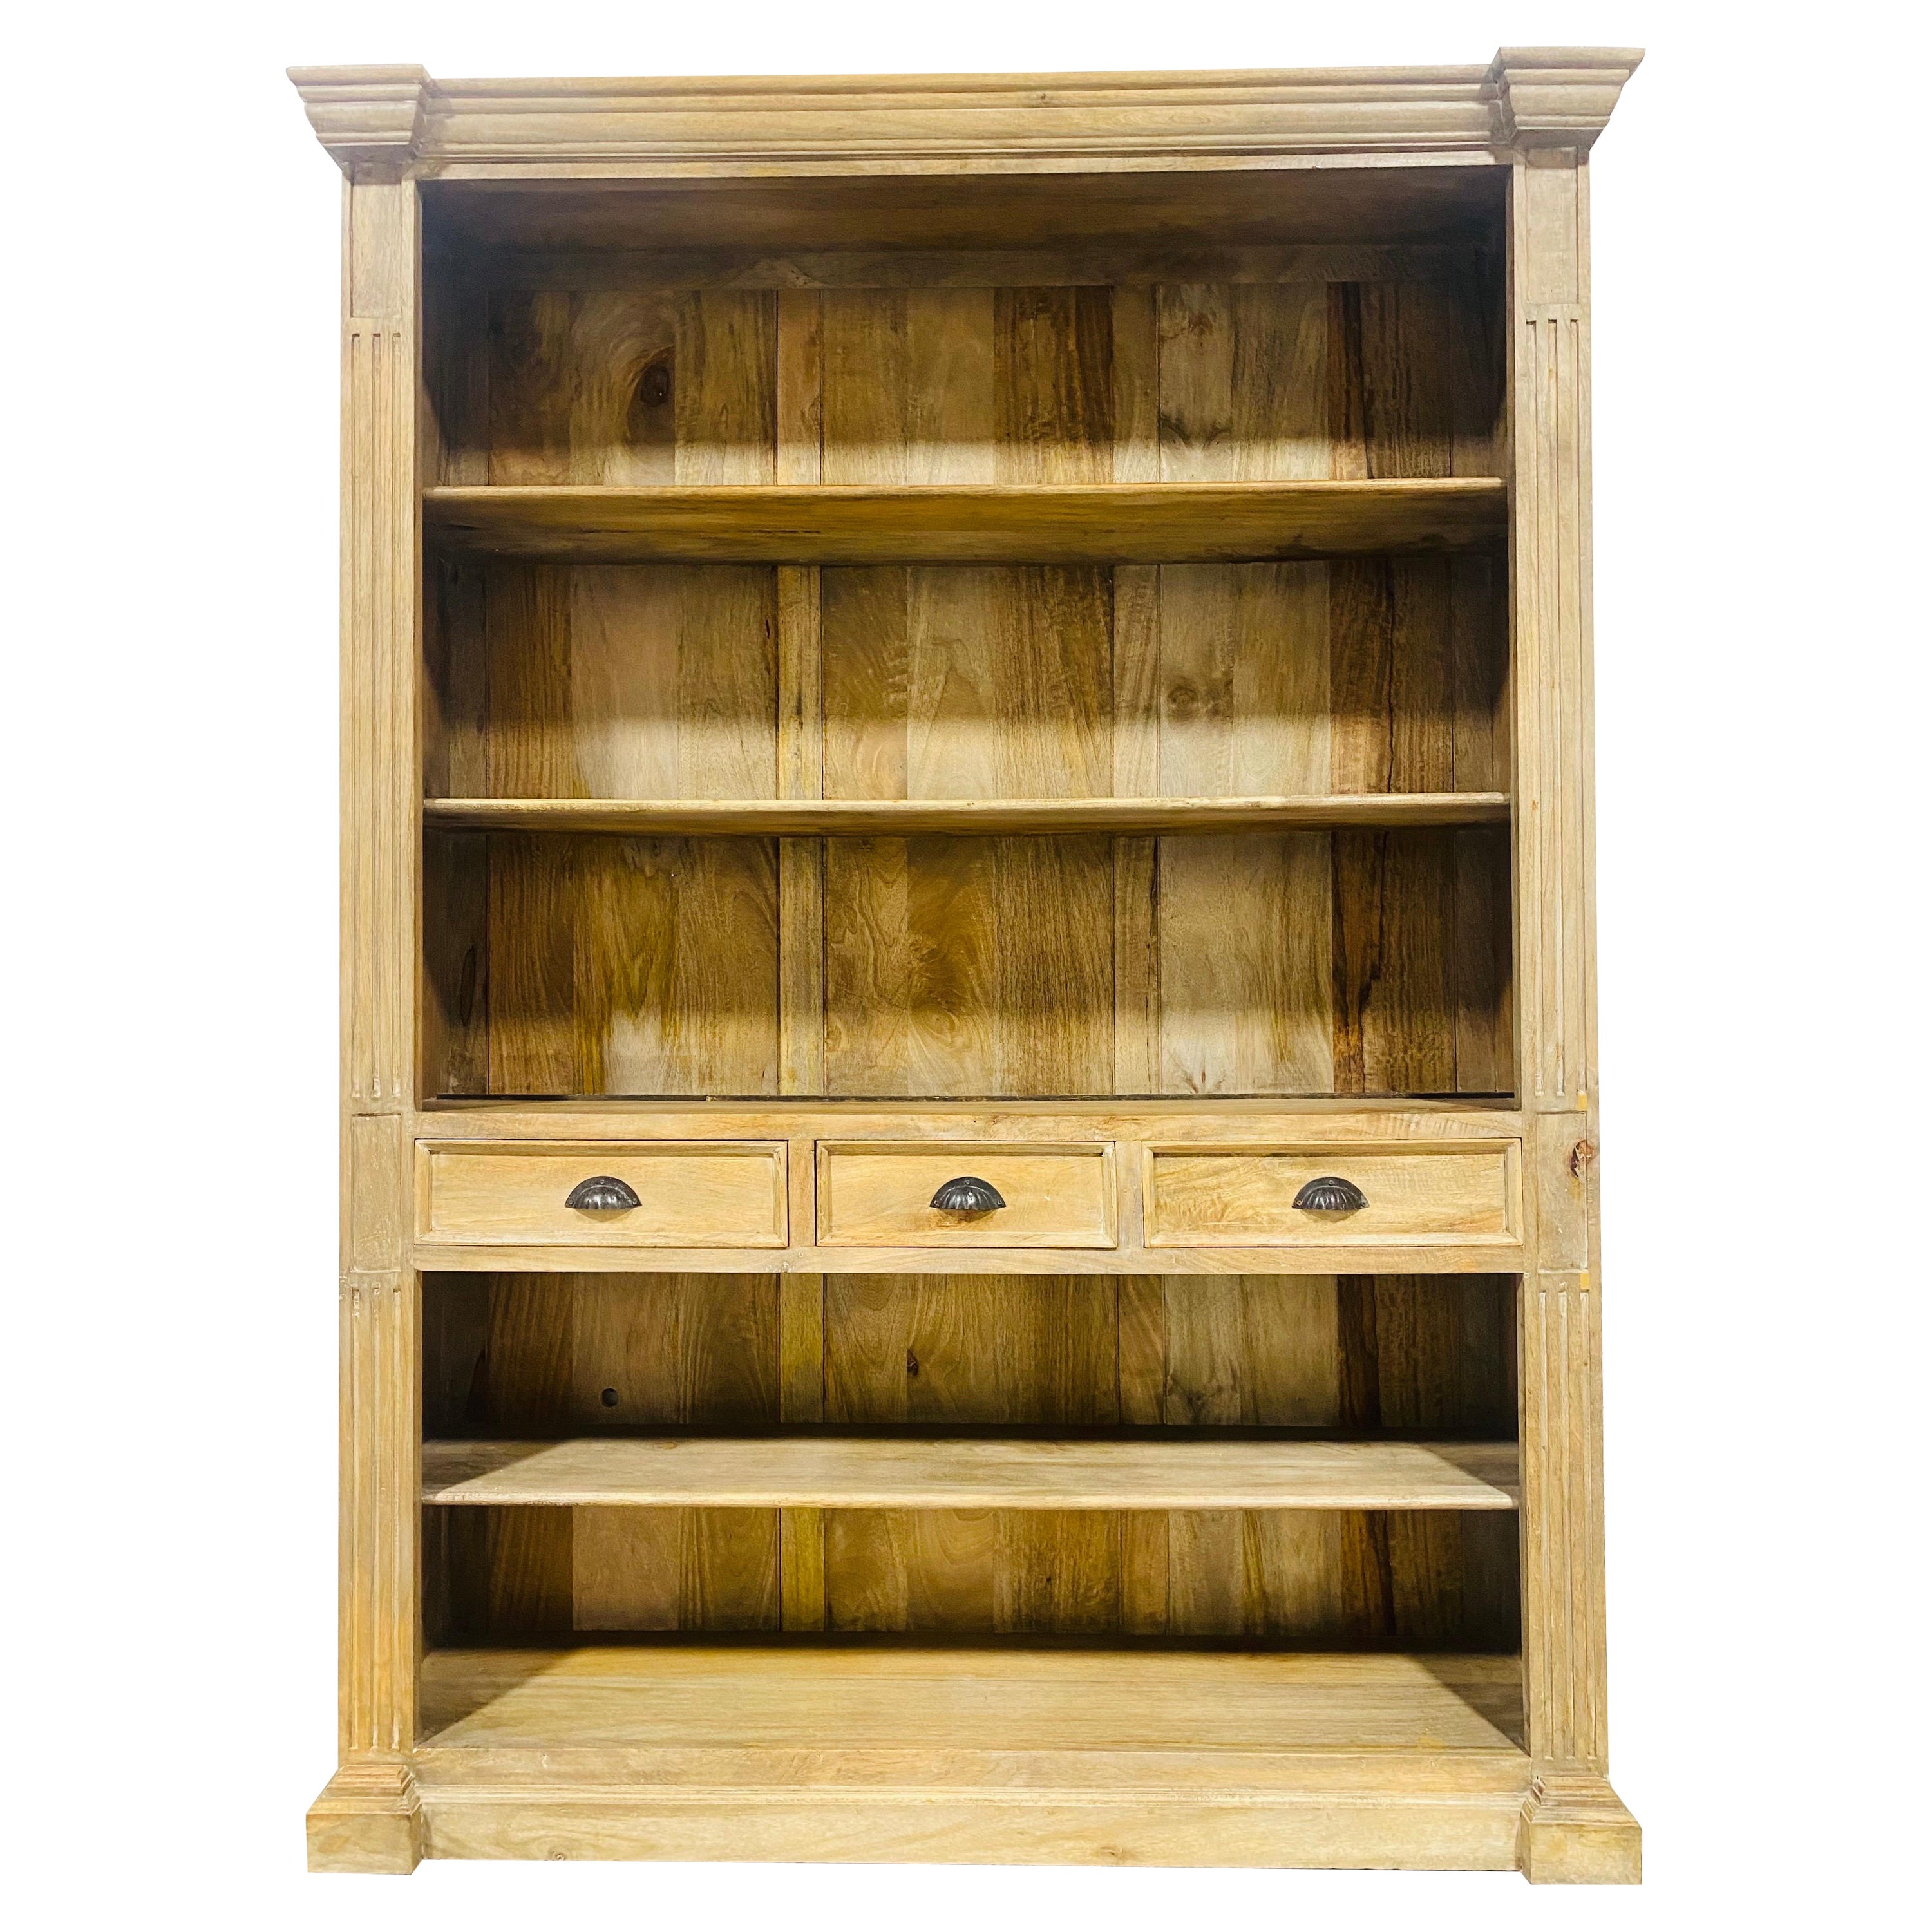 Vintage rustic classical style bookcase/cabinet